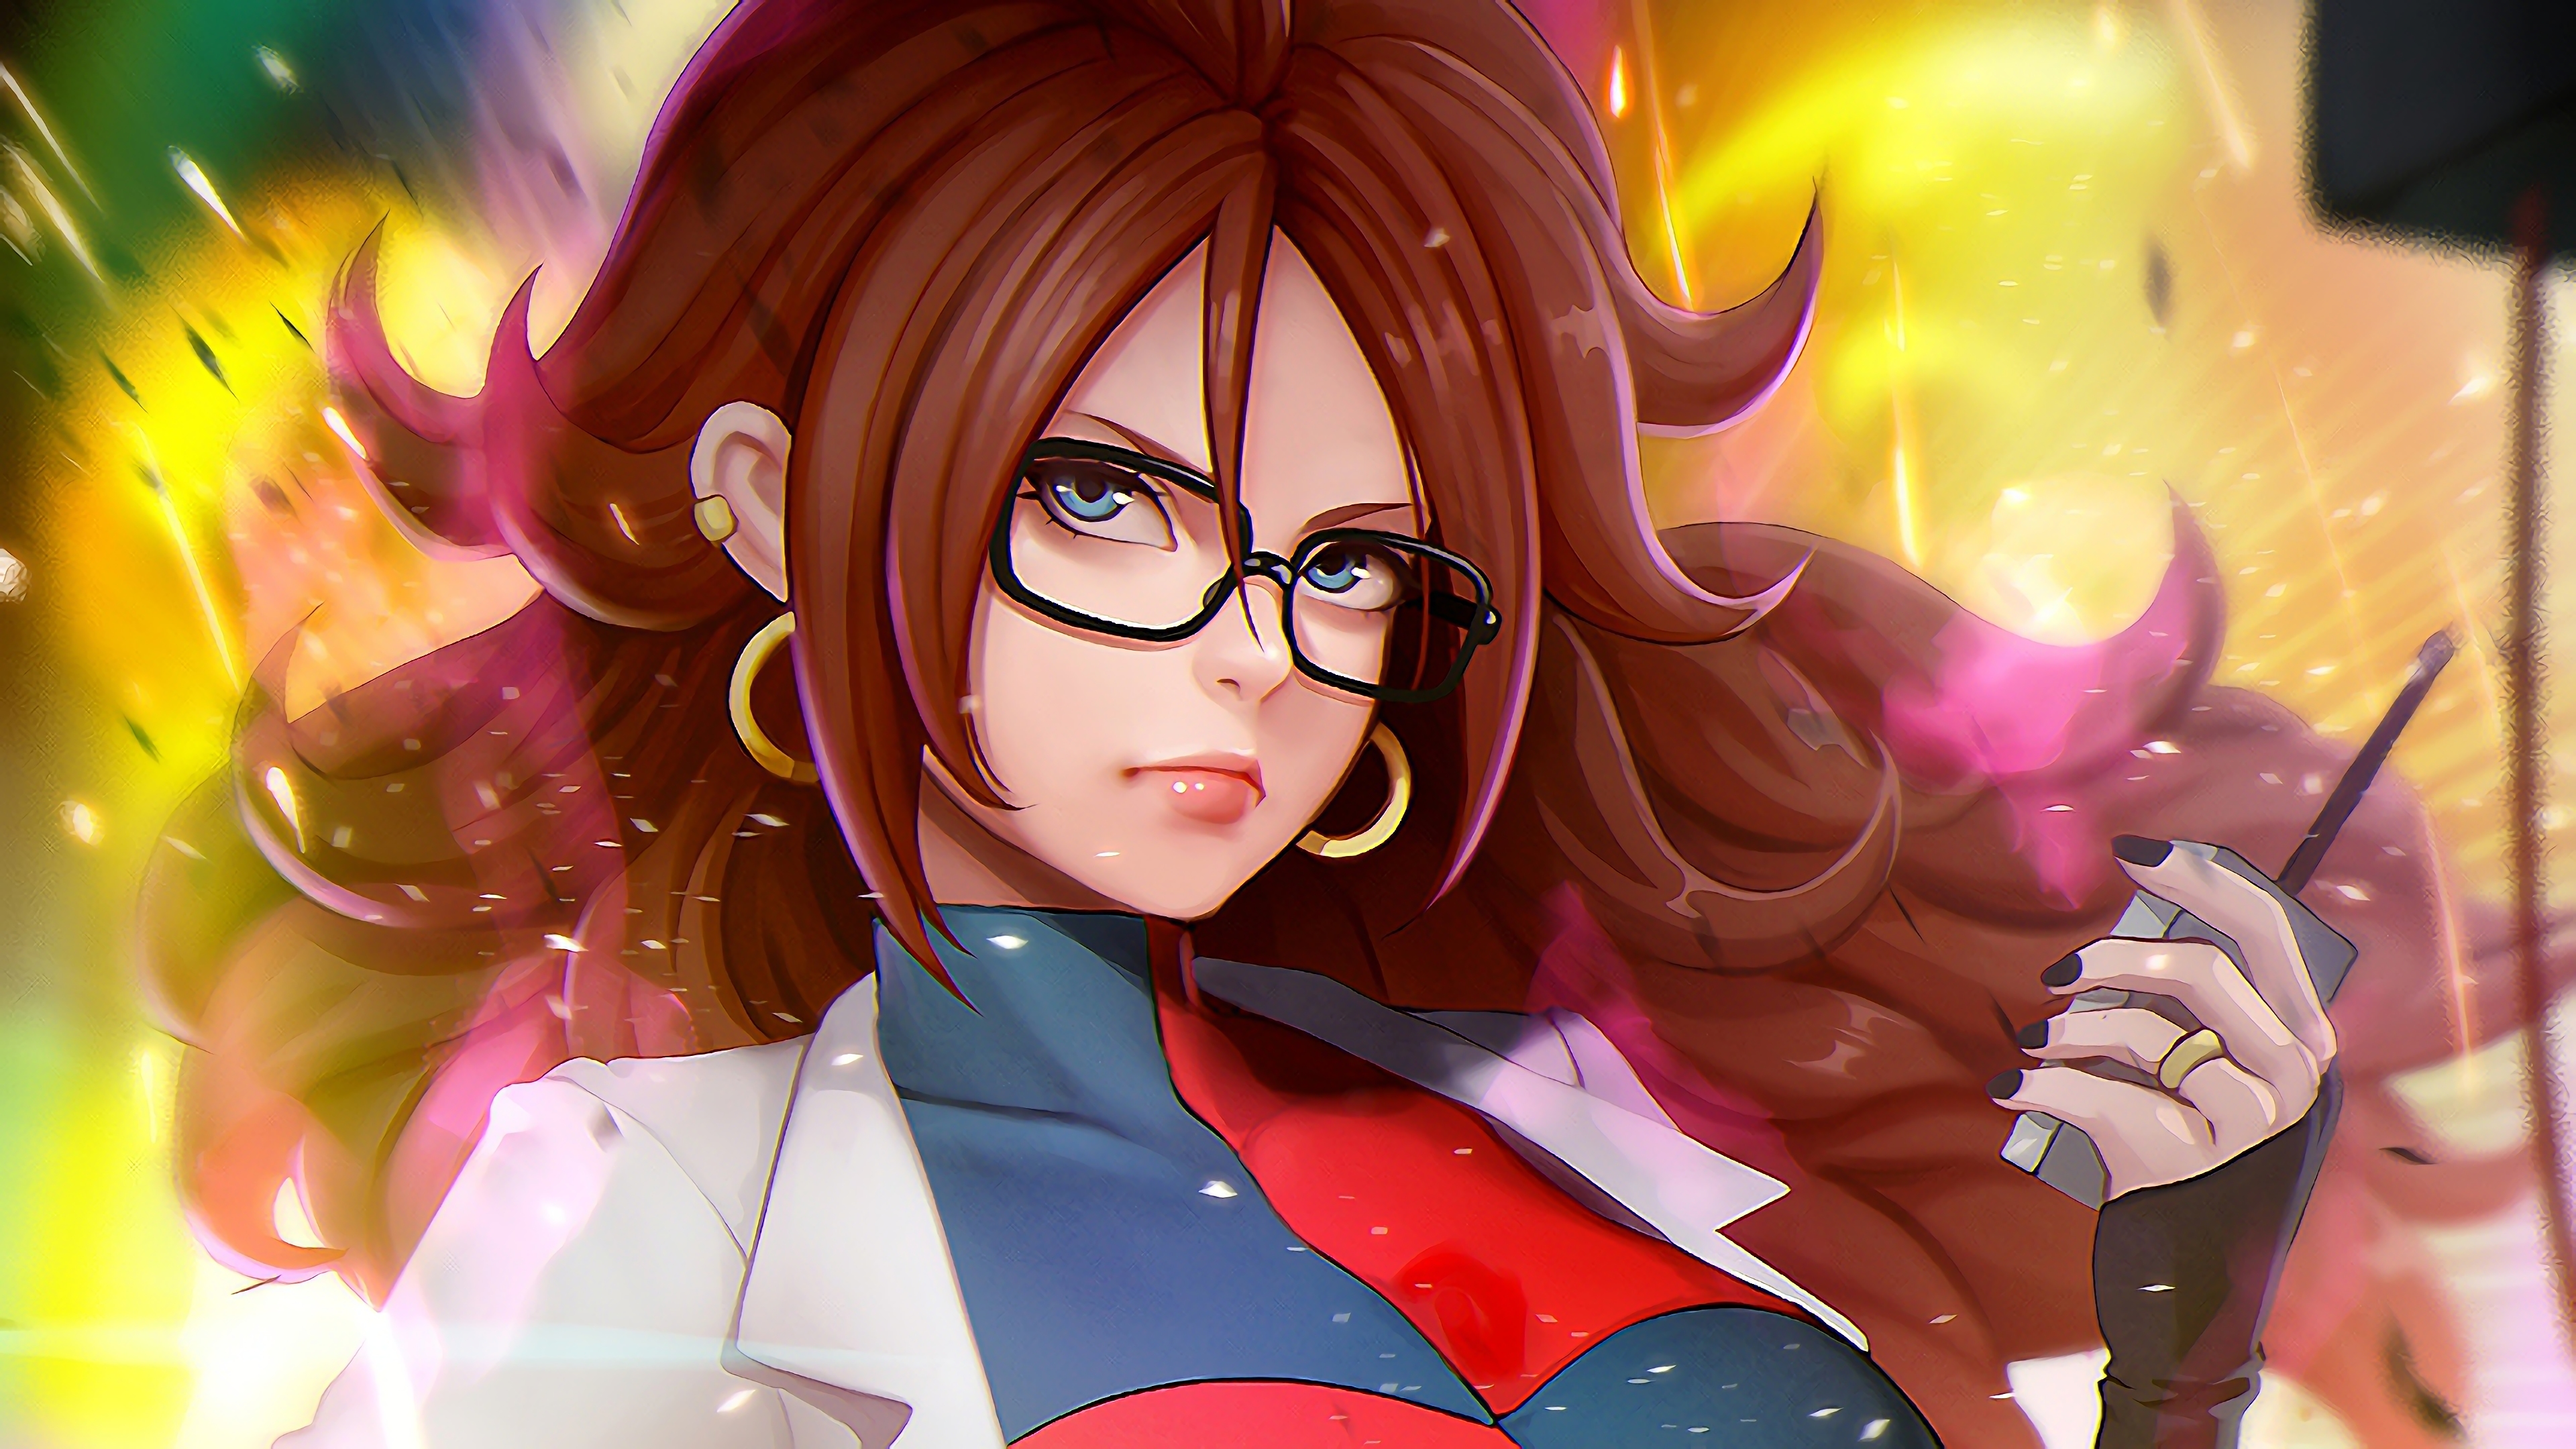 Android 21 Dragon Ball Fighter Z, HD Games, 4k Wallpapers ...